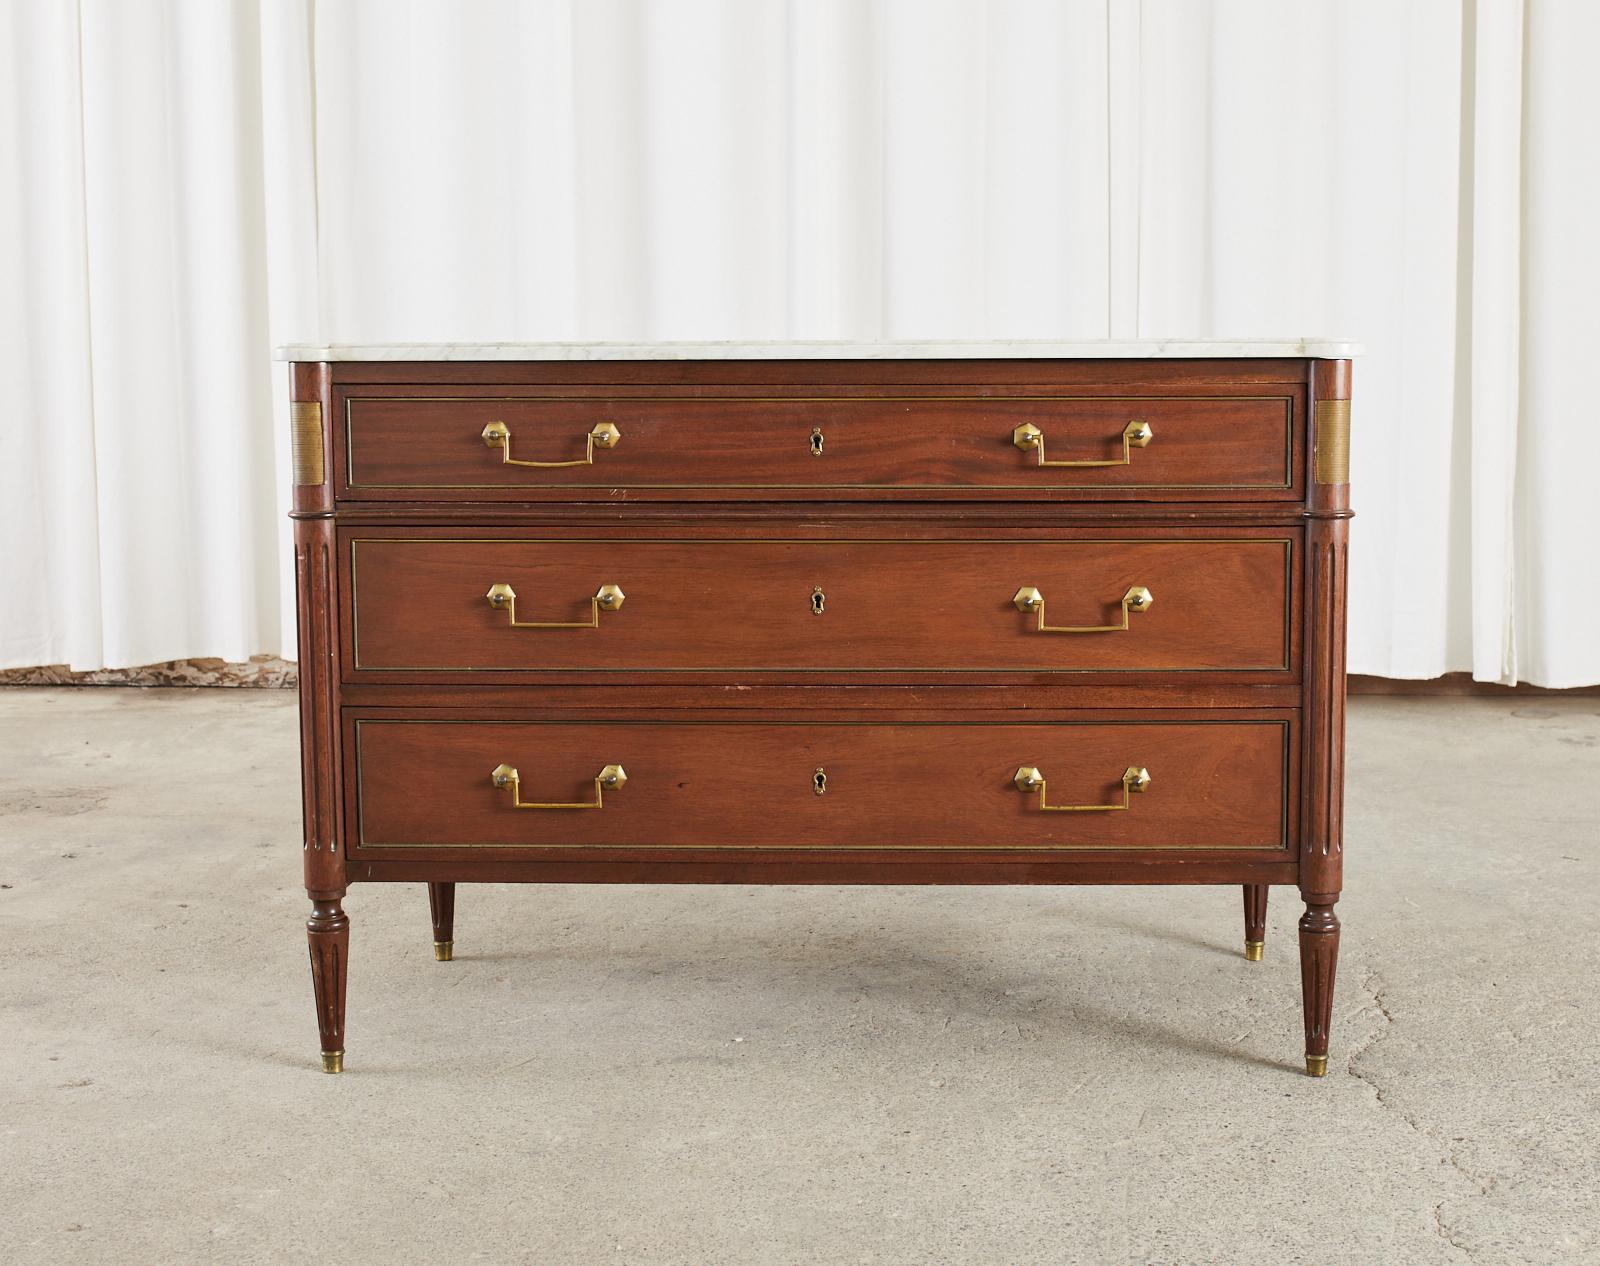 20th Century French Louis XVI Style Mahogany Marble Top Commode Chest